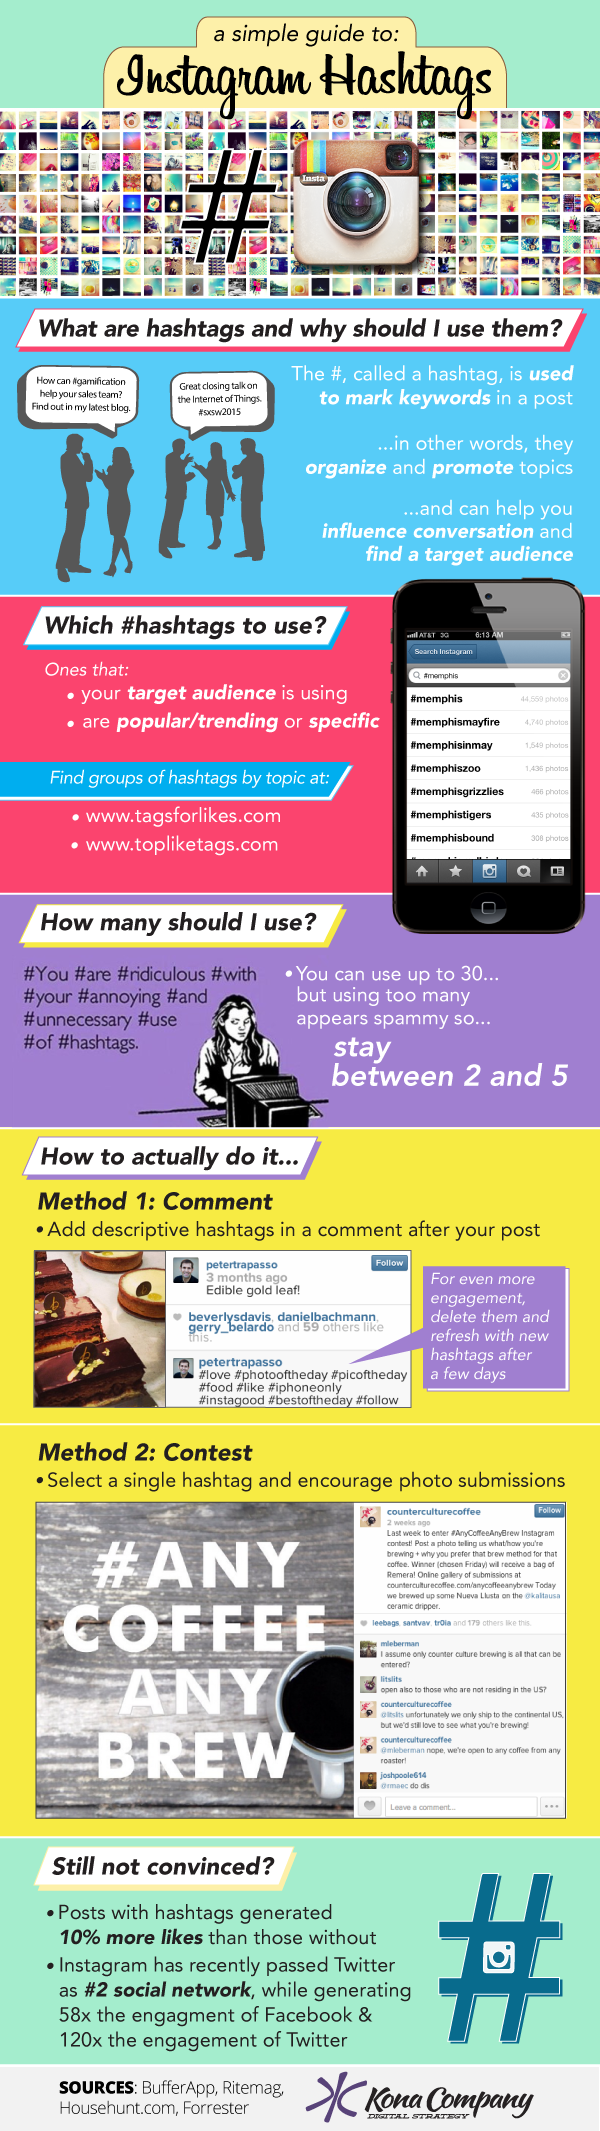 A Simple Guide to Instagram Hashtags [Infographic]